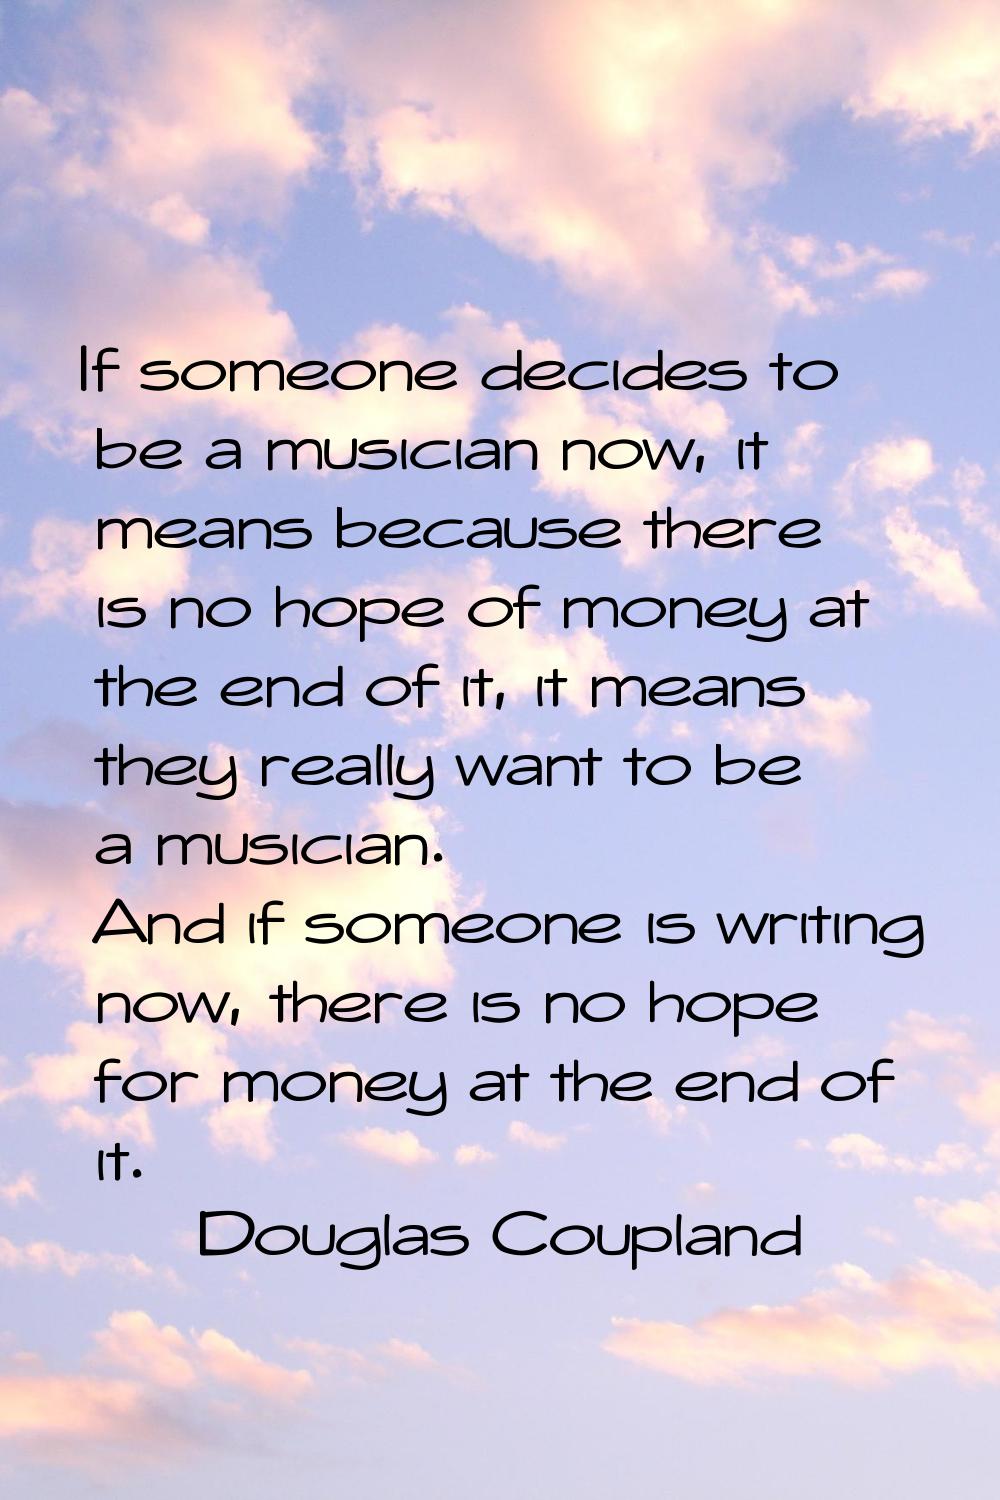 If someone decides to be a musician now, it means because there is no hope of money at the end of i